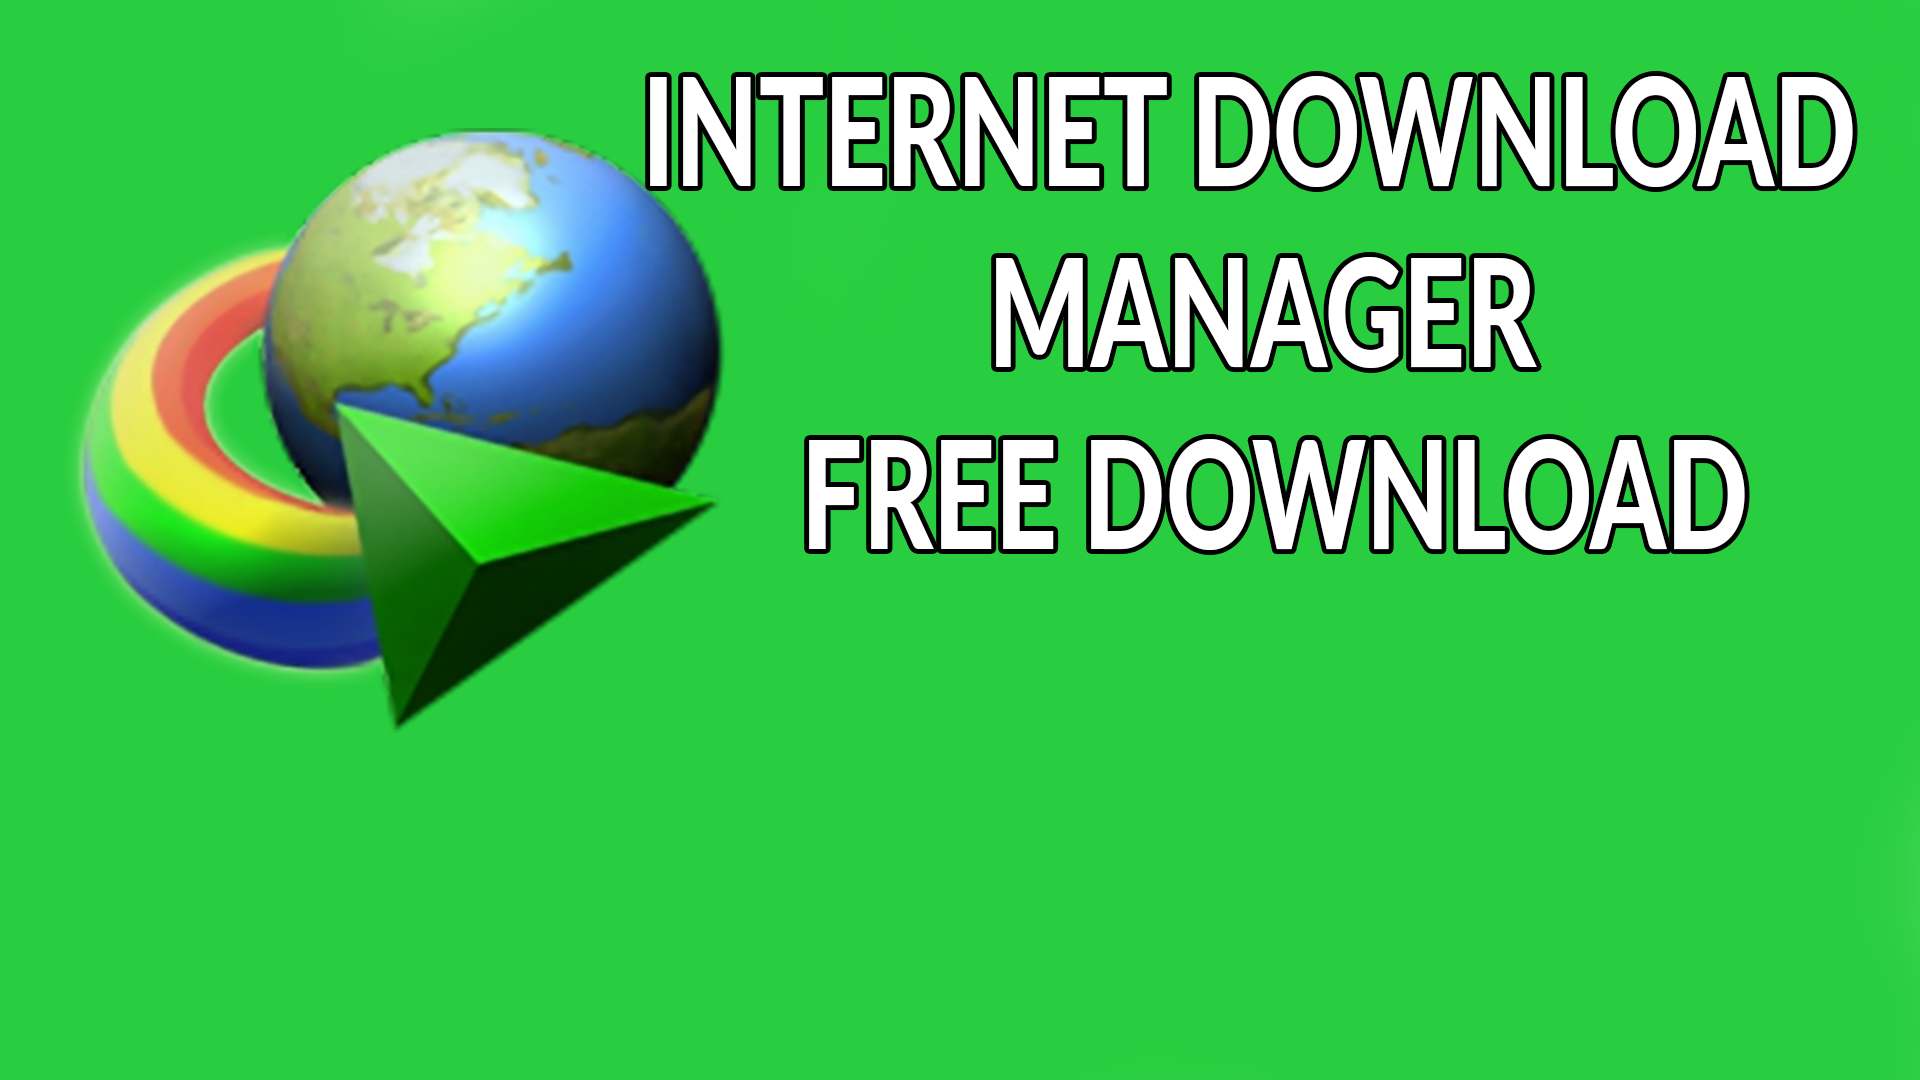 free internet download manager to download full